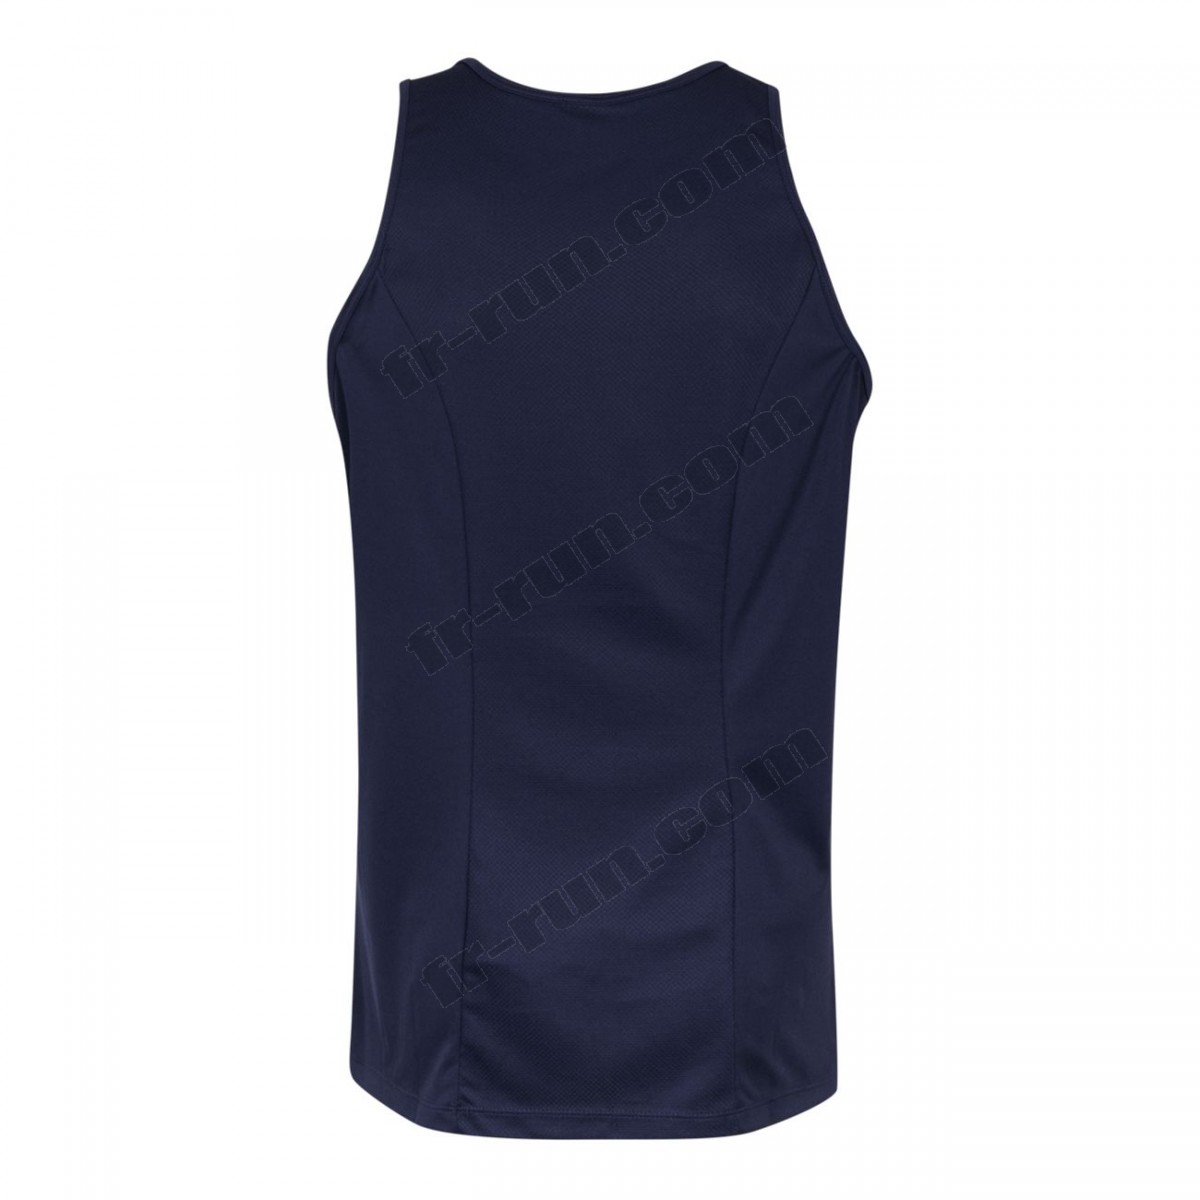 Kappa/running homme KAPPA Maillot manches courtes FANTO - Noir - Homme √ Nouveau style √ Soldes - -5